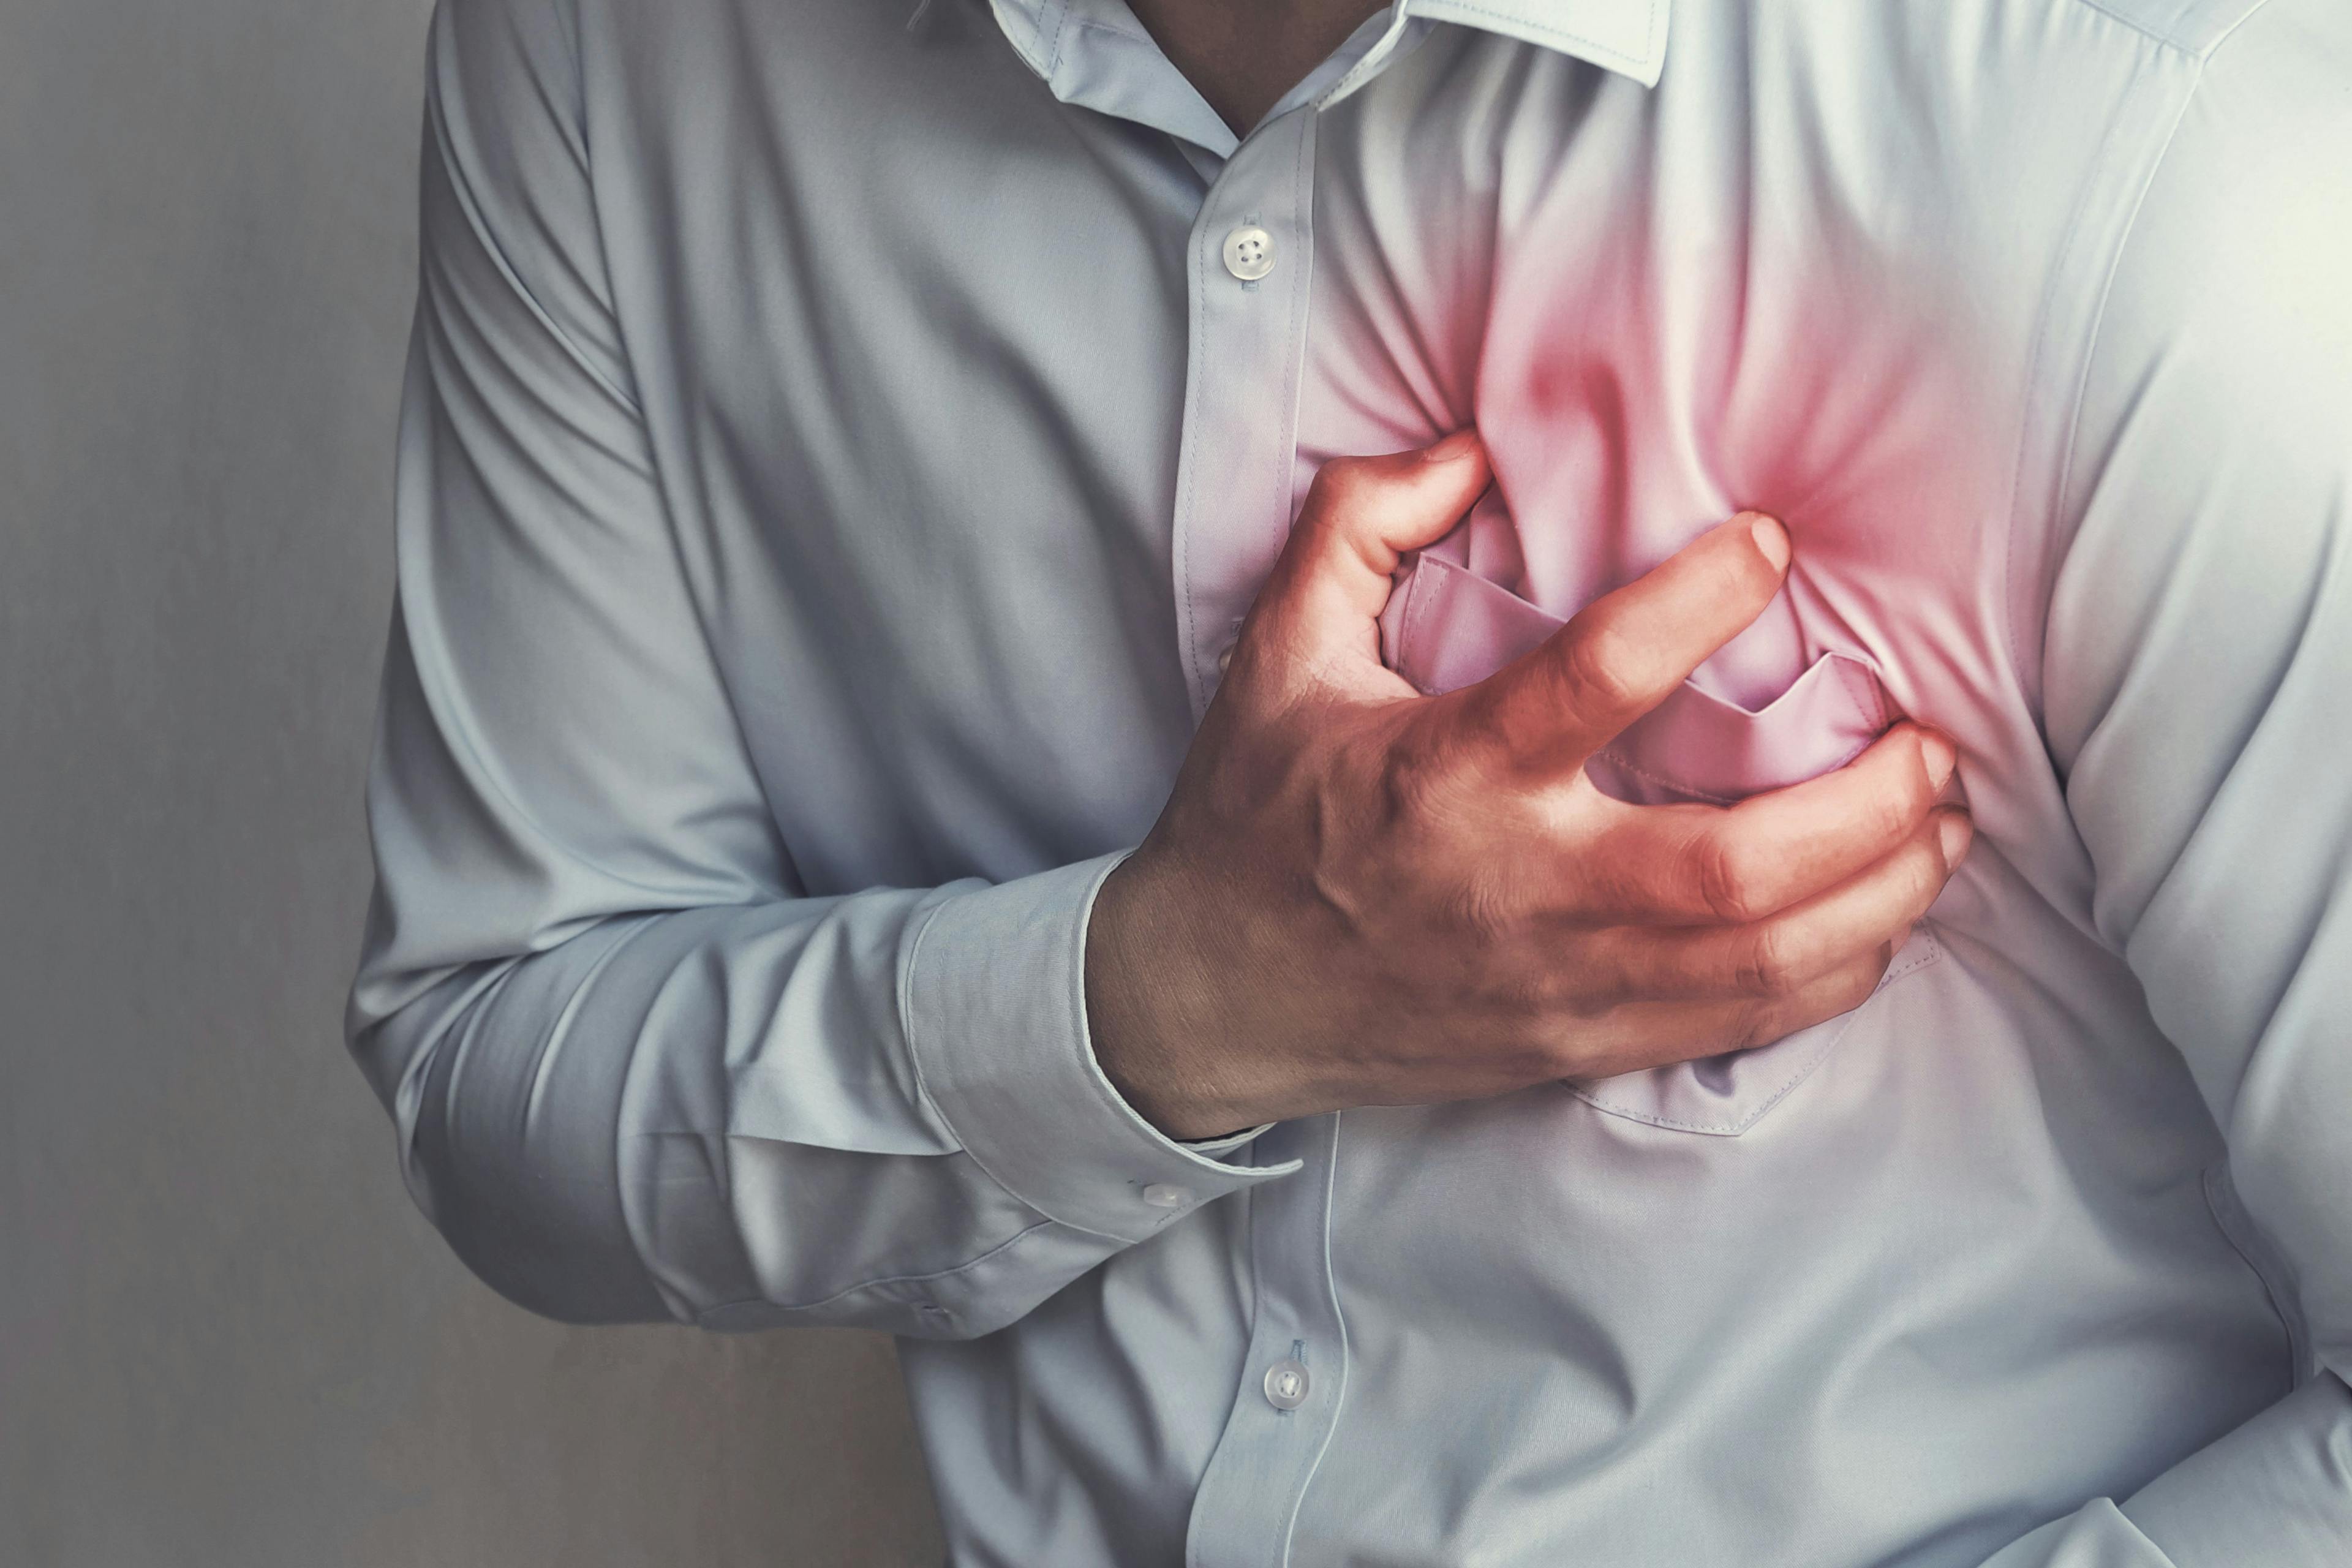 People chest pain from heart attack. healthcare concept. Credit: lovelyday12 - stock.adobe.com